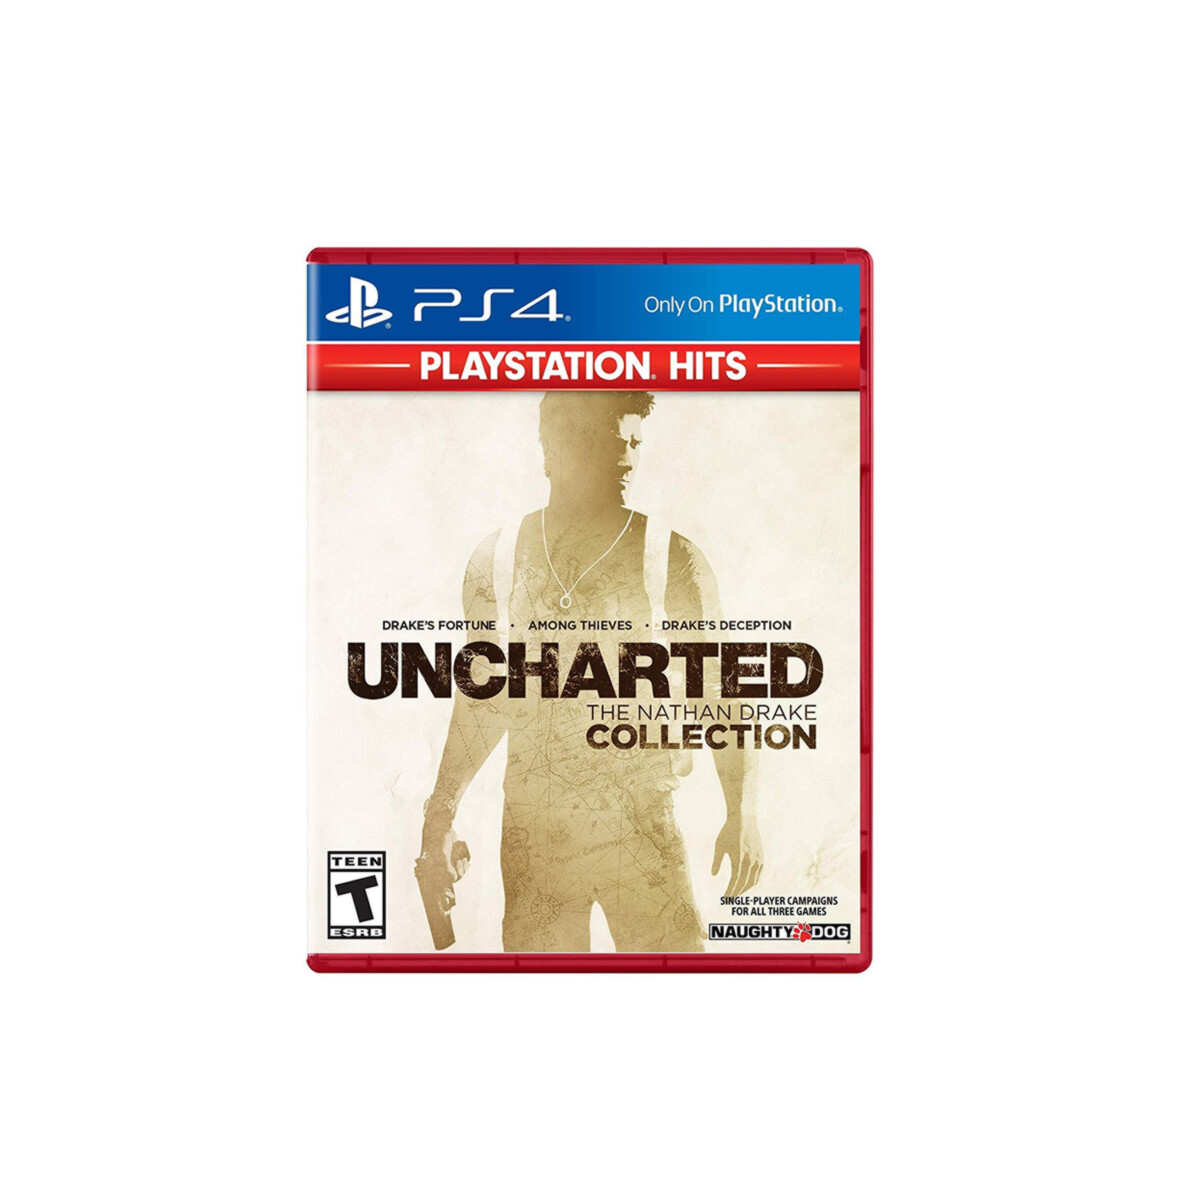 PS4 Uncharted Collection 